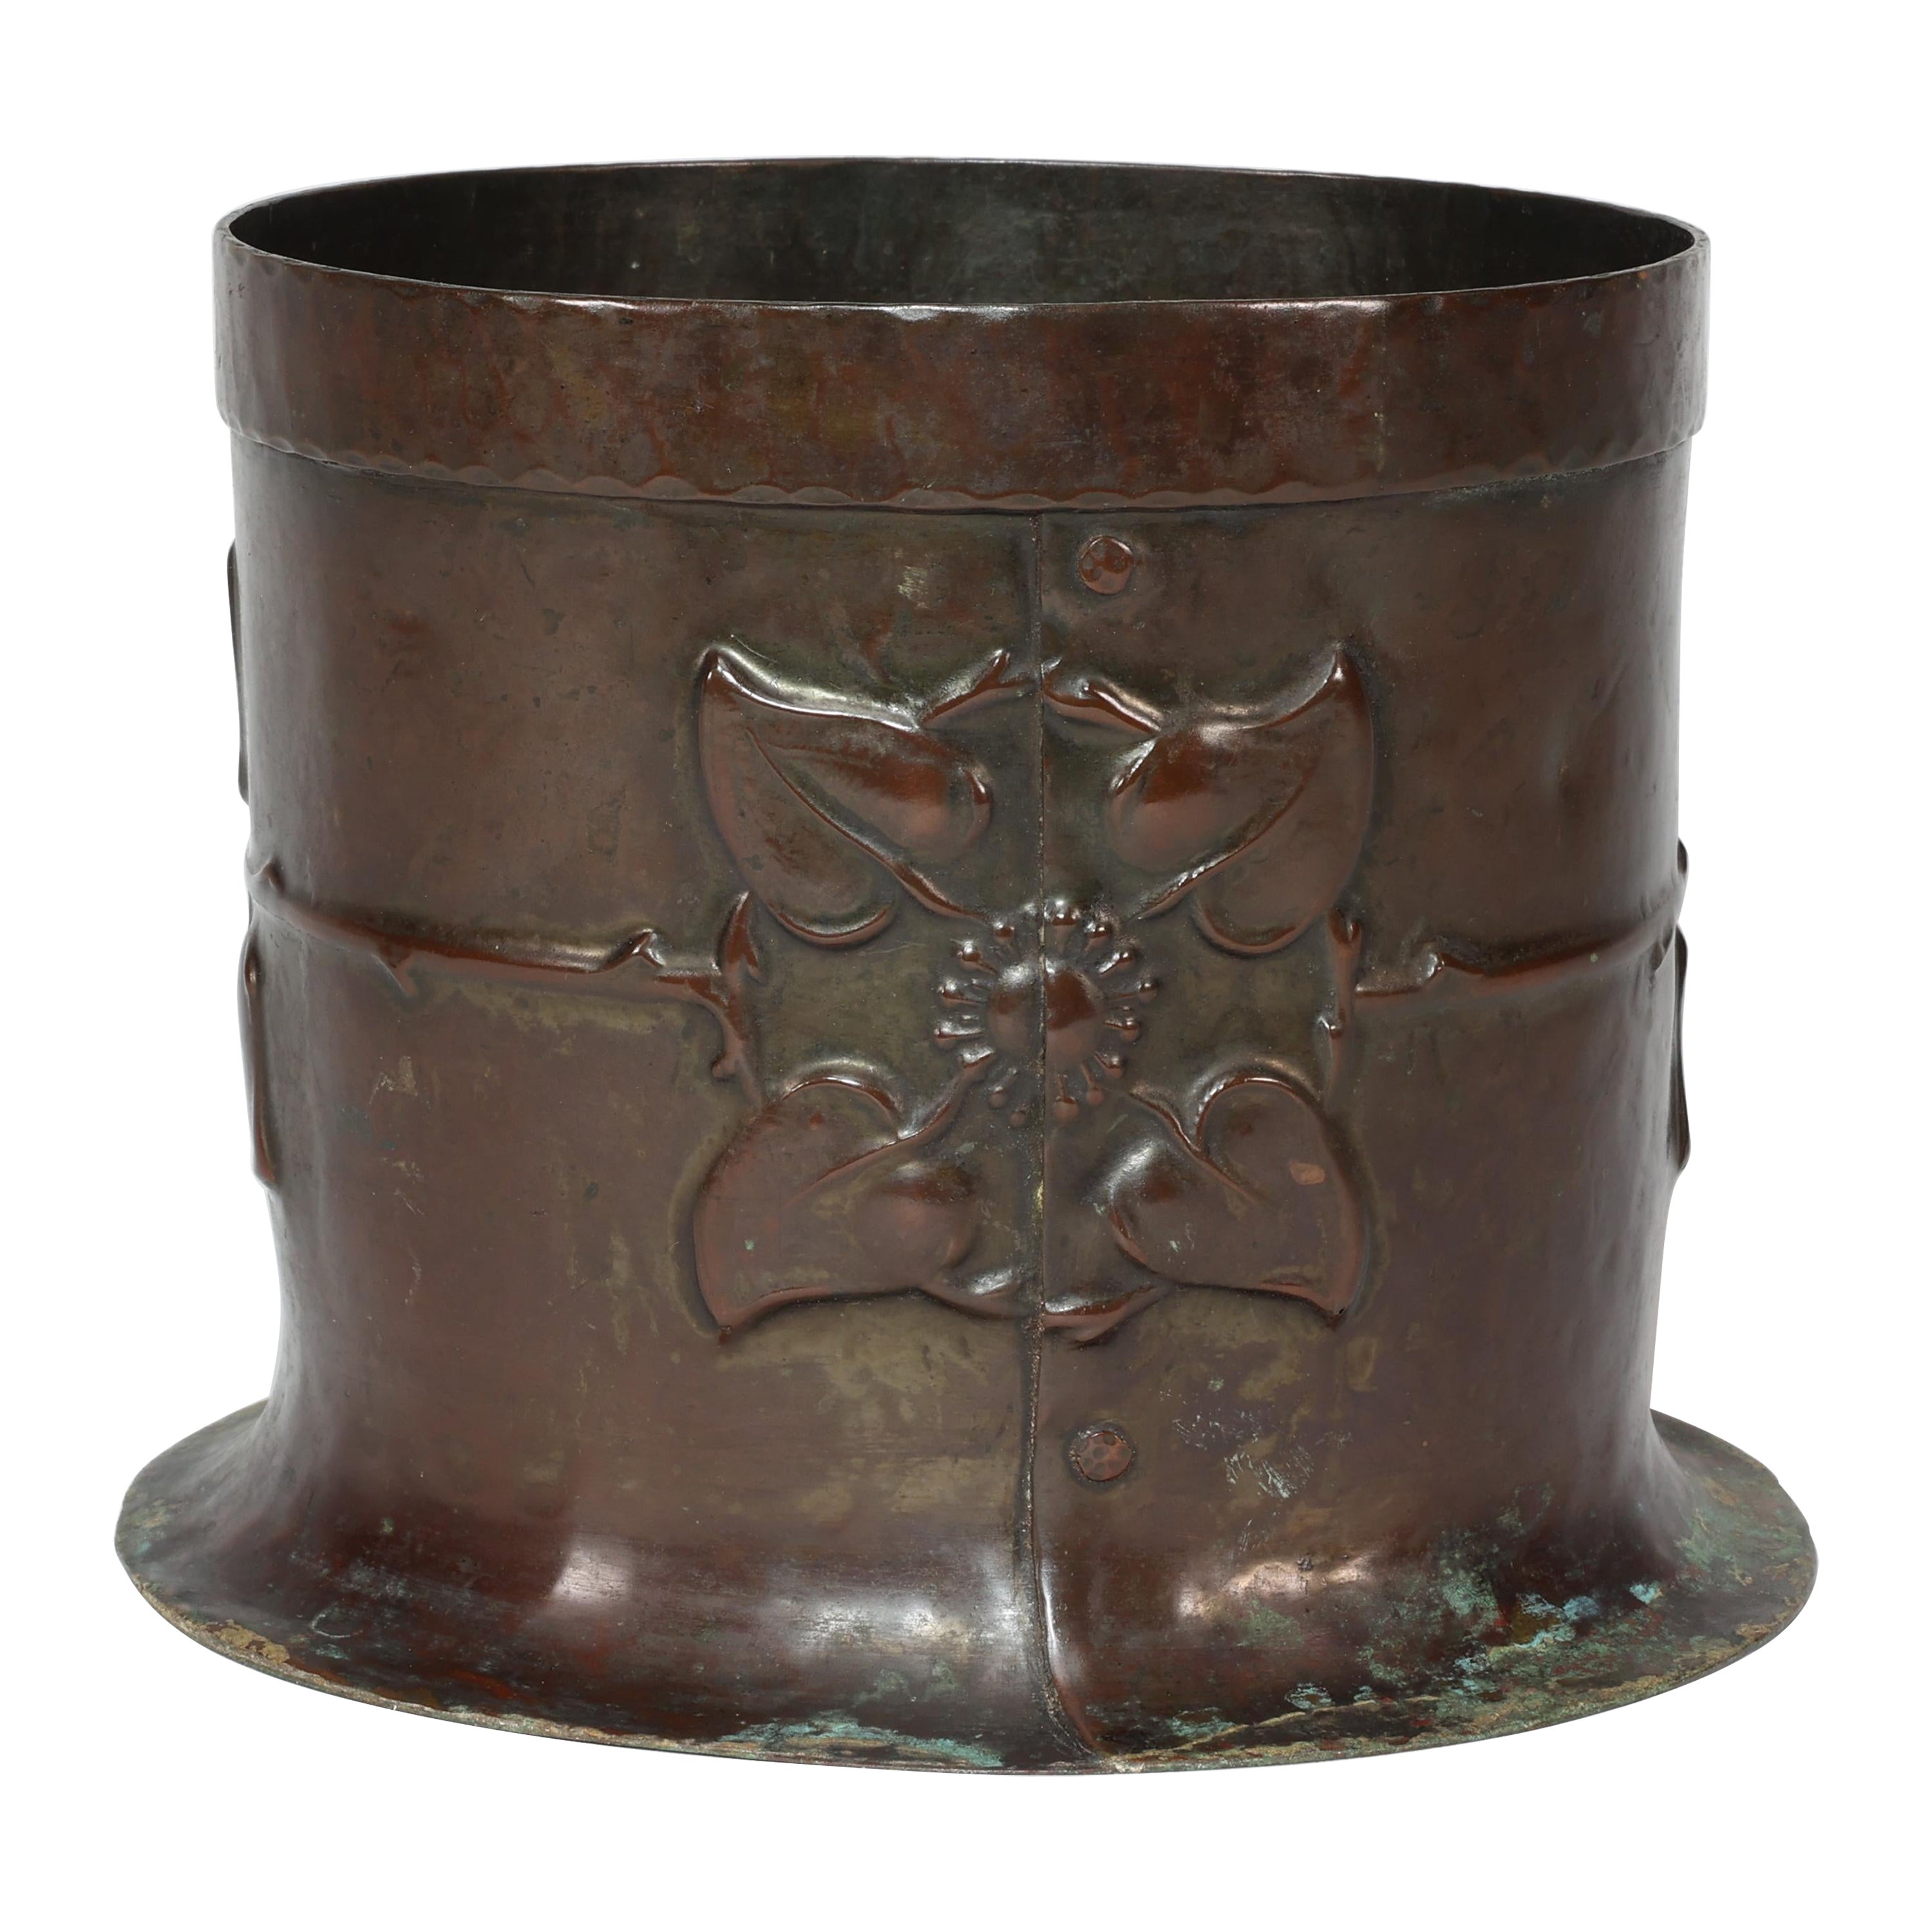 Guild of Handicraft style of. An Arts & Crafts copper plant pot with two florets